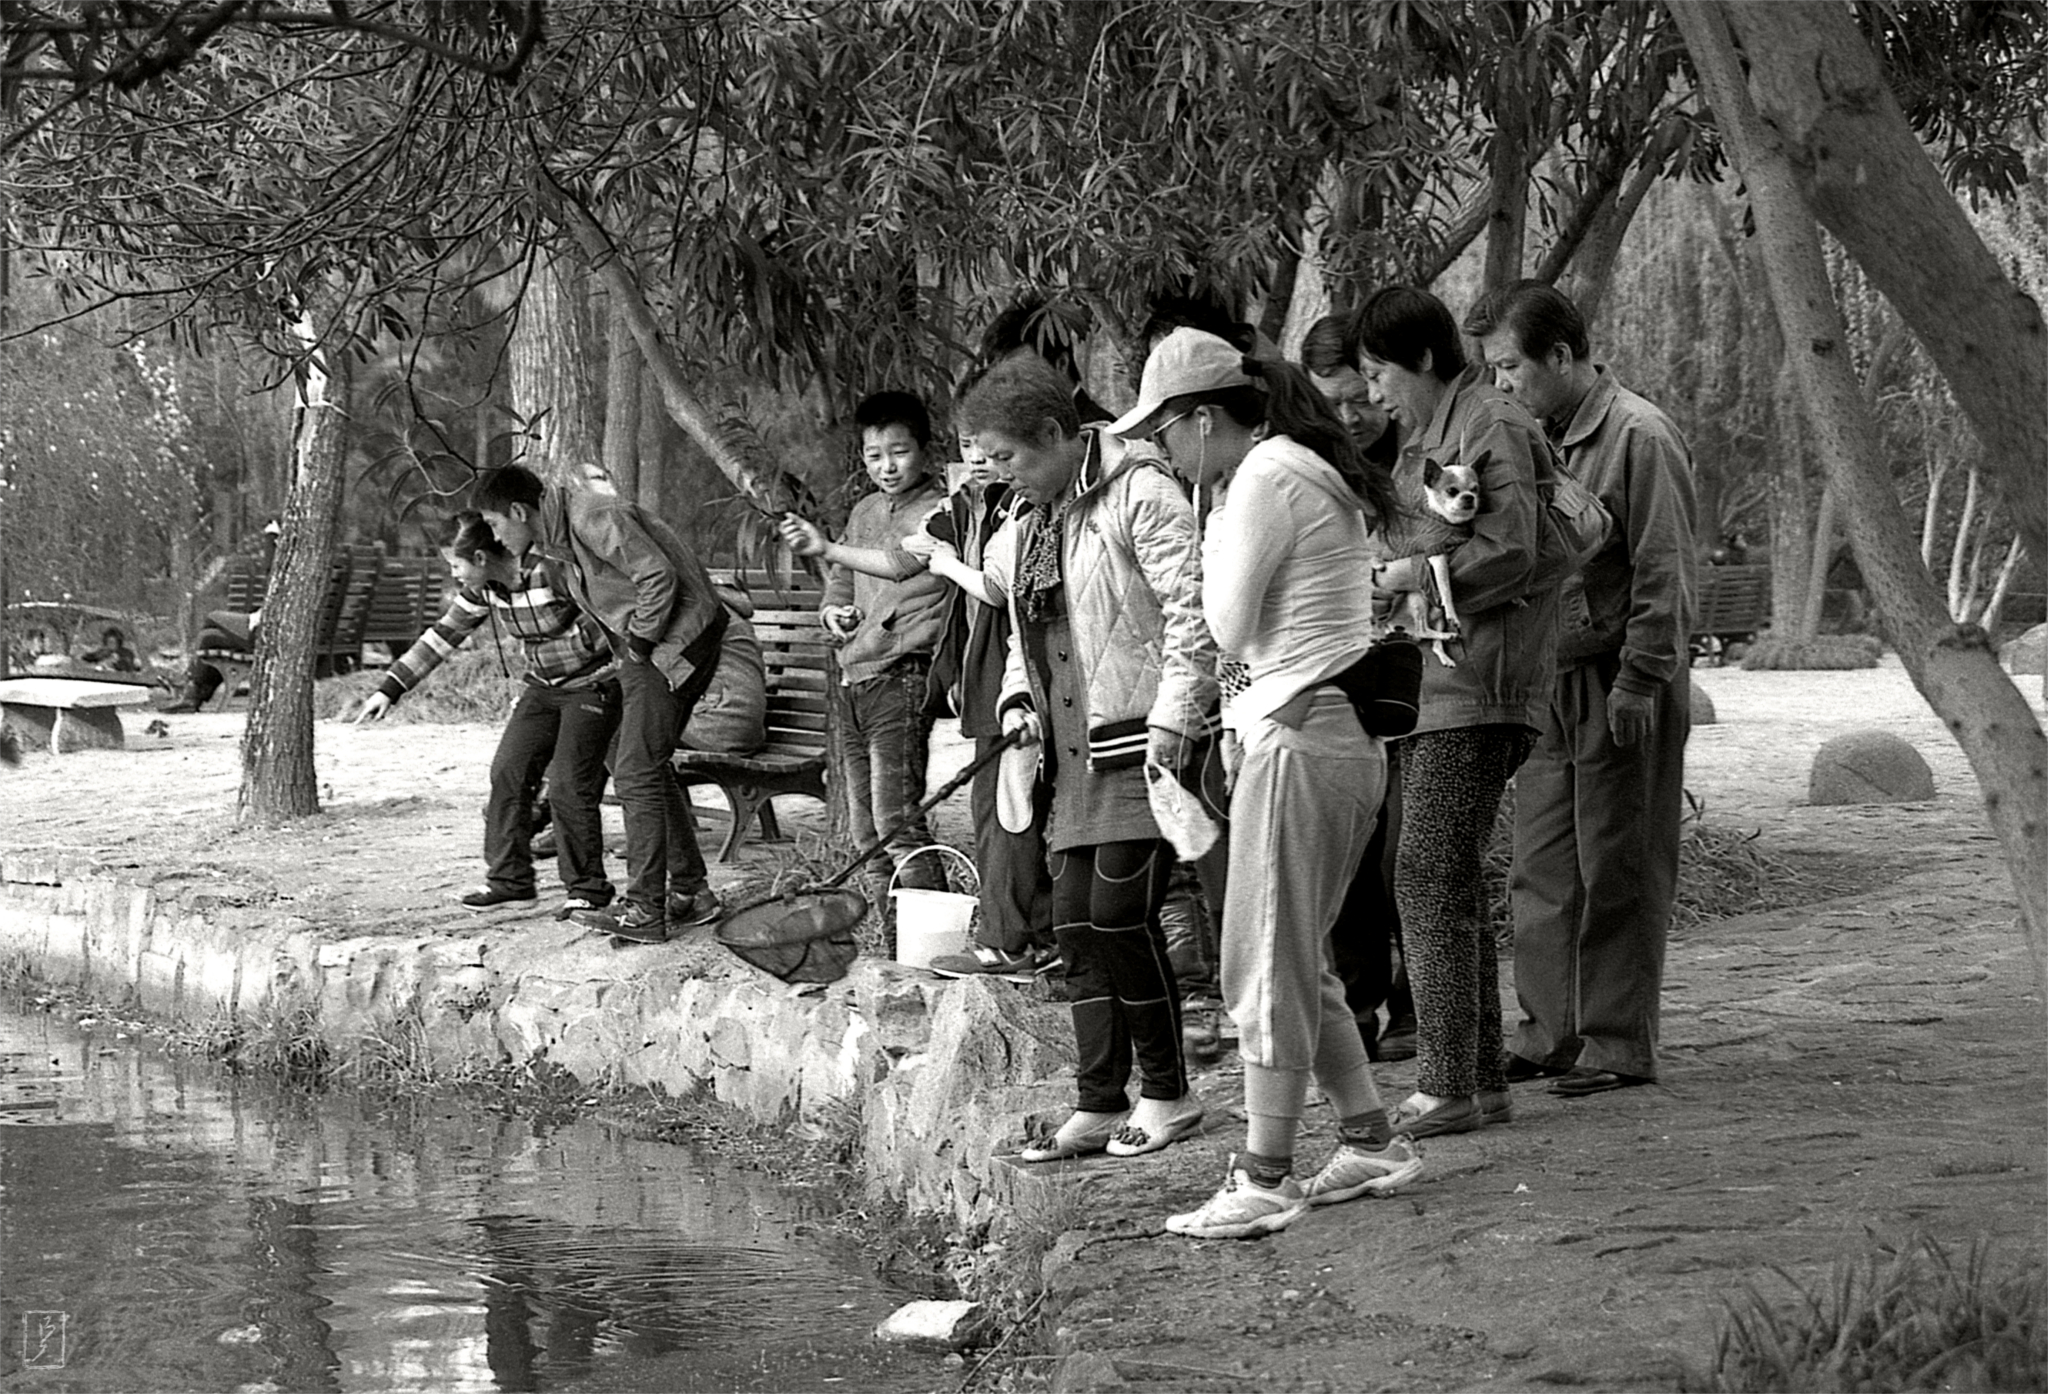 Lu Xun park (鲁迅公园): Visitors of the park discovered something in the water.